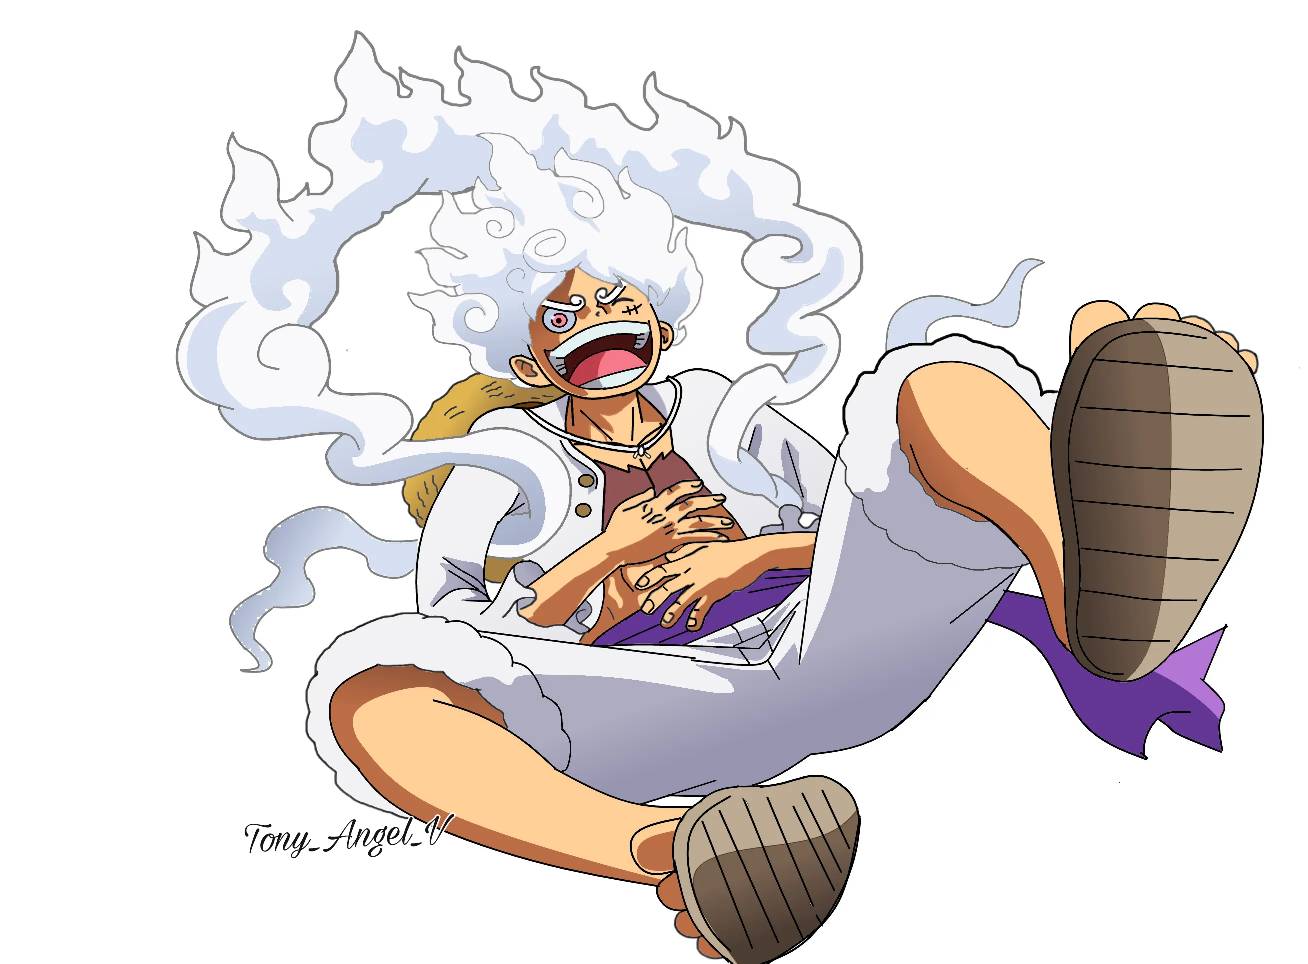 Luffy Gear 5 color by Xhobiii on DeviantArt